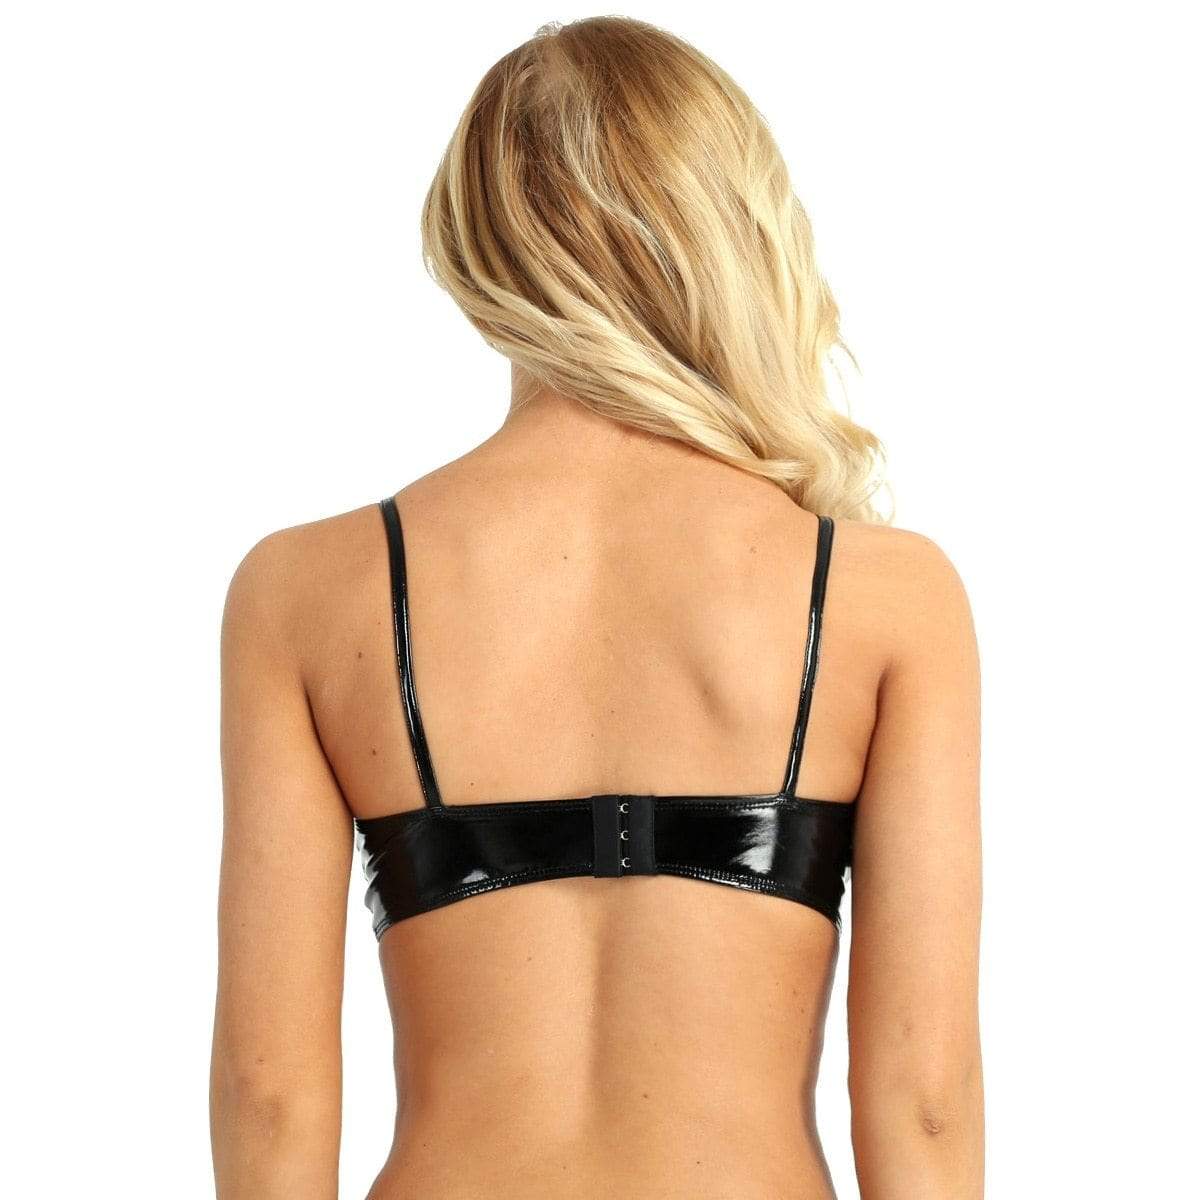 Kinky Cloth Lingerie Black Faux Leather Top